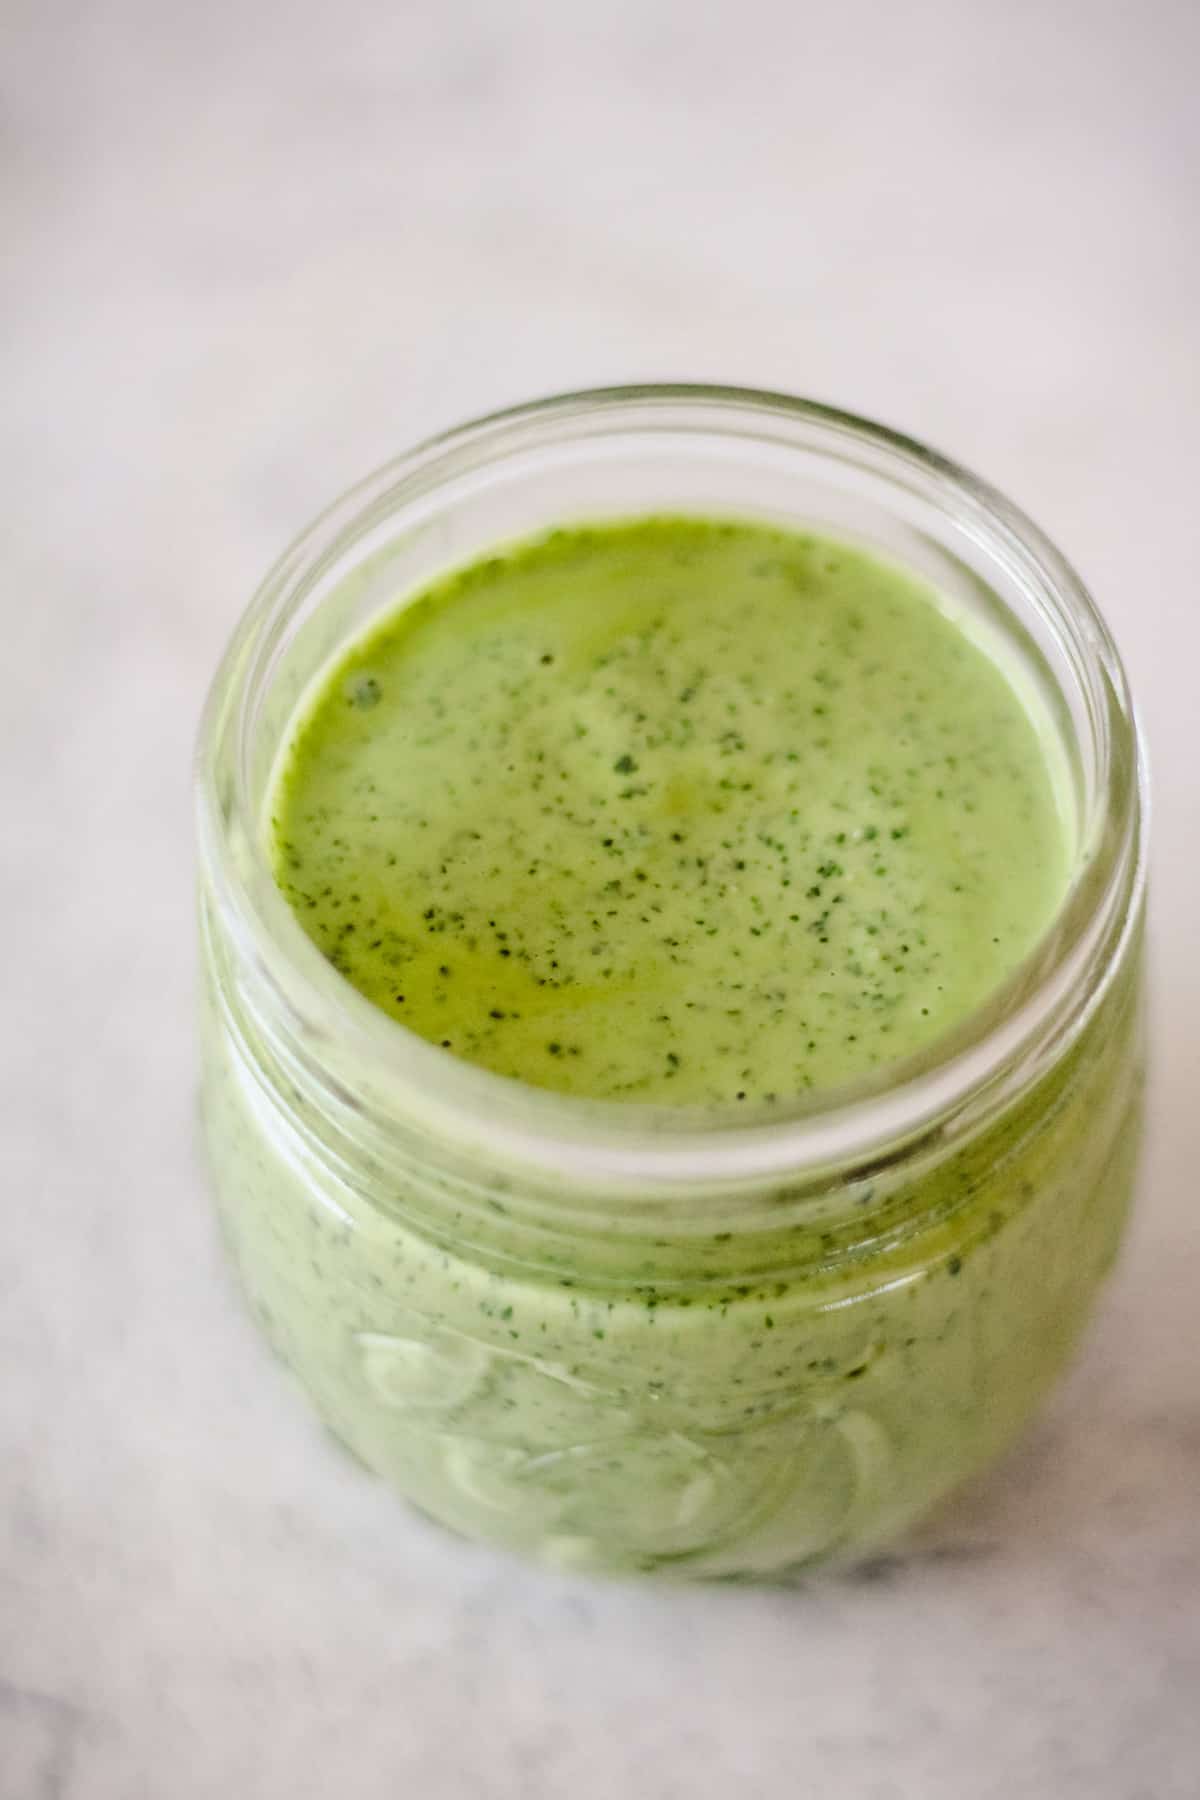 Vegan Green Goddess Dressing in a glass jar with a white background.